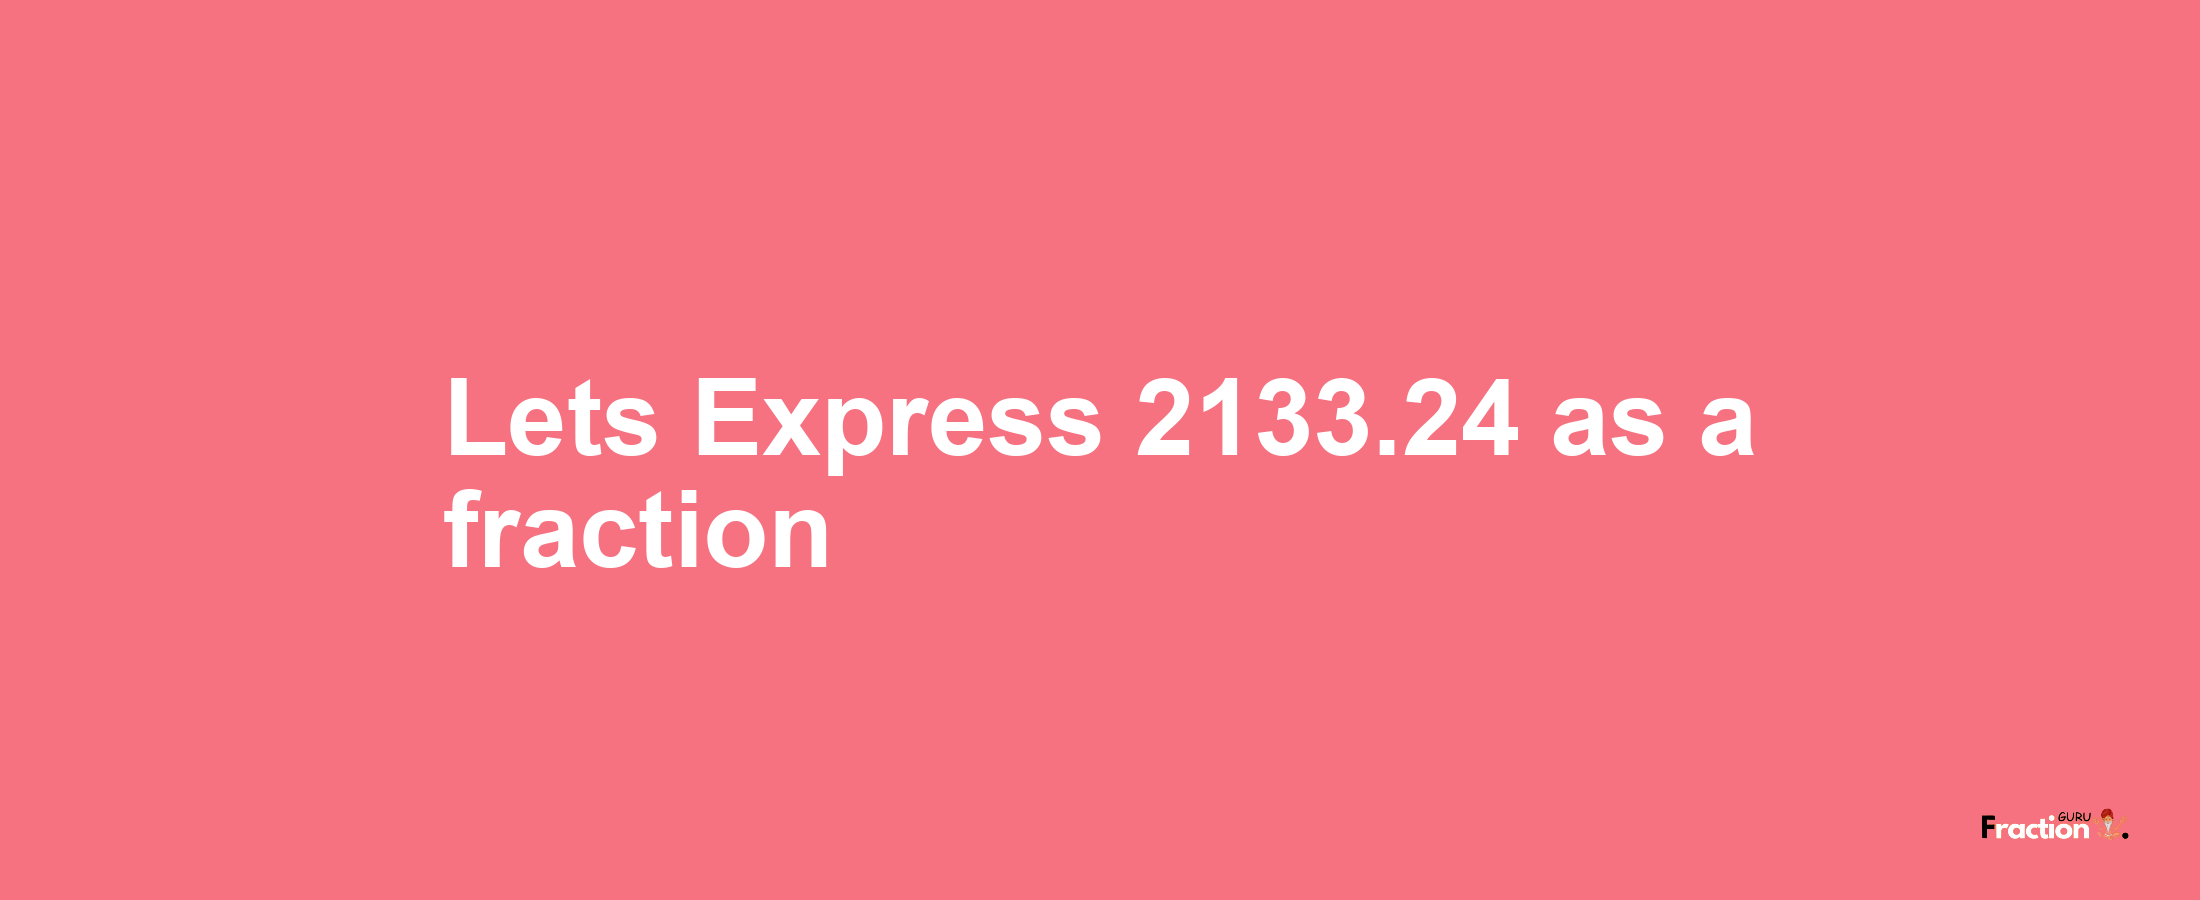 Lets Express 2133.24 as afraction